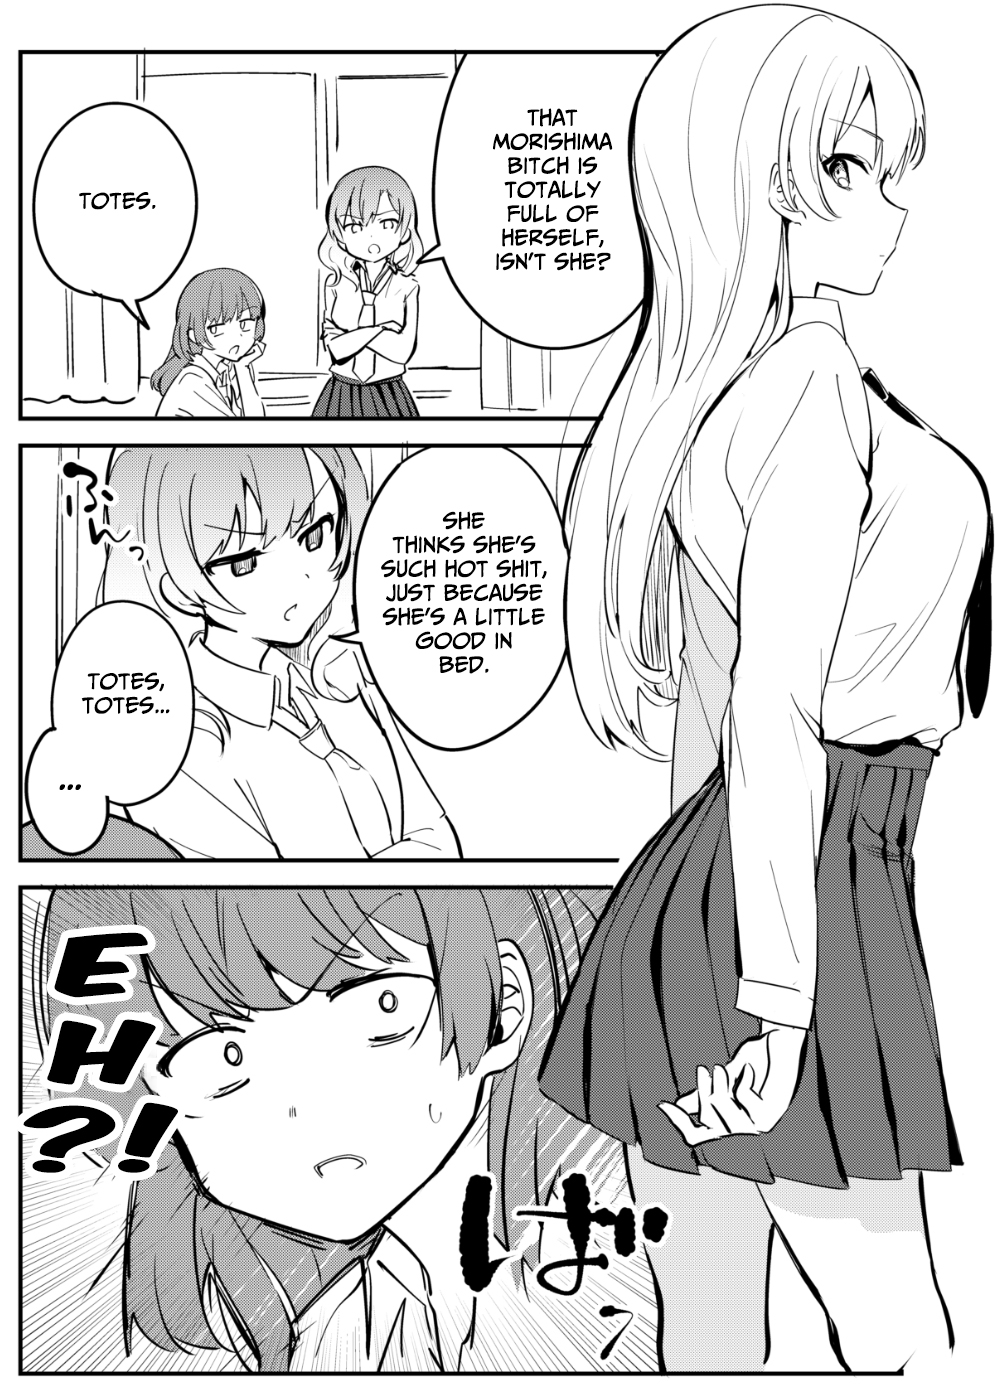 A Girl Whose Breasts are a Little Big and is Kinda Pretty Ch. 2 ！！！！？？？？？？